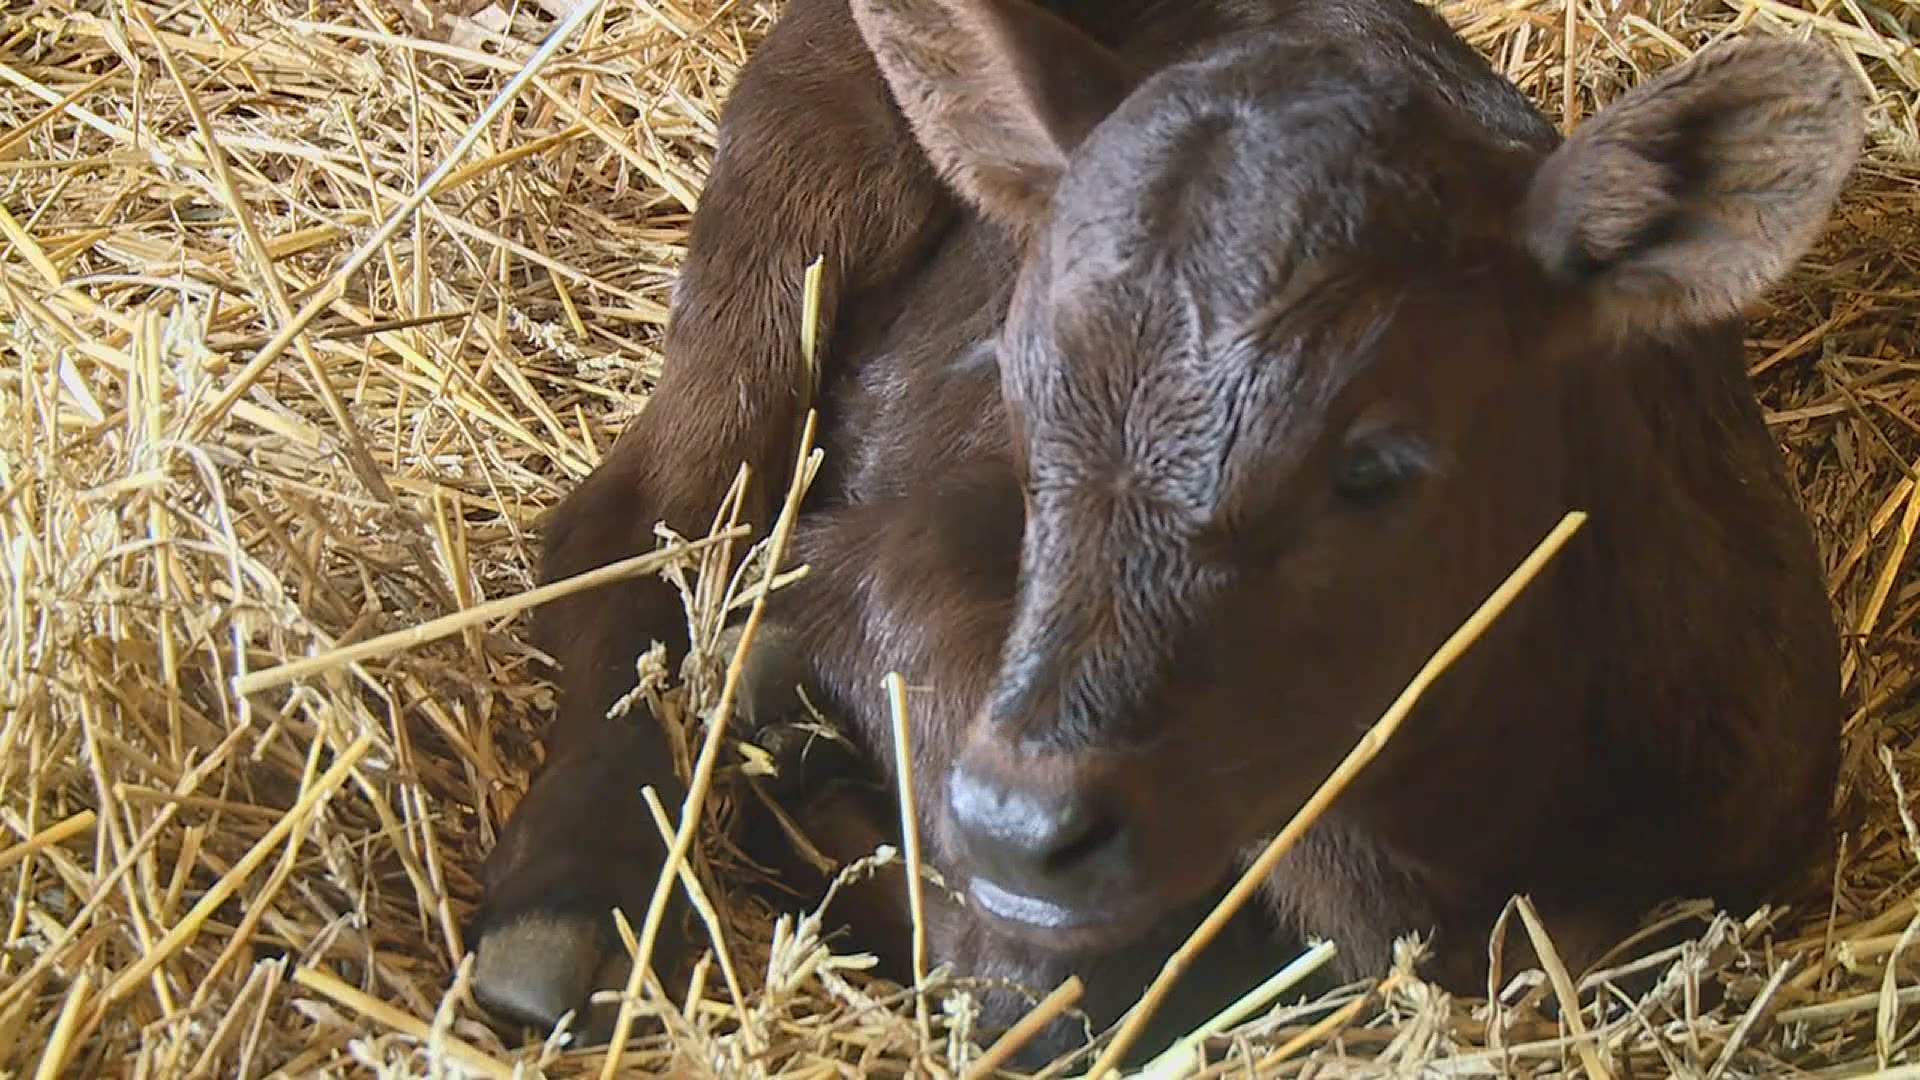 For a cow to give birth to triplets is a 1 in 105,000 chance. But momma "Minnie" not only defied the odds... she also gave her owners the surprise of their life.